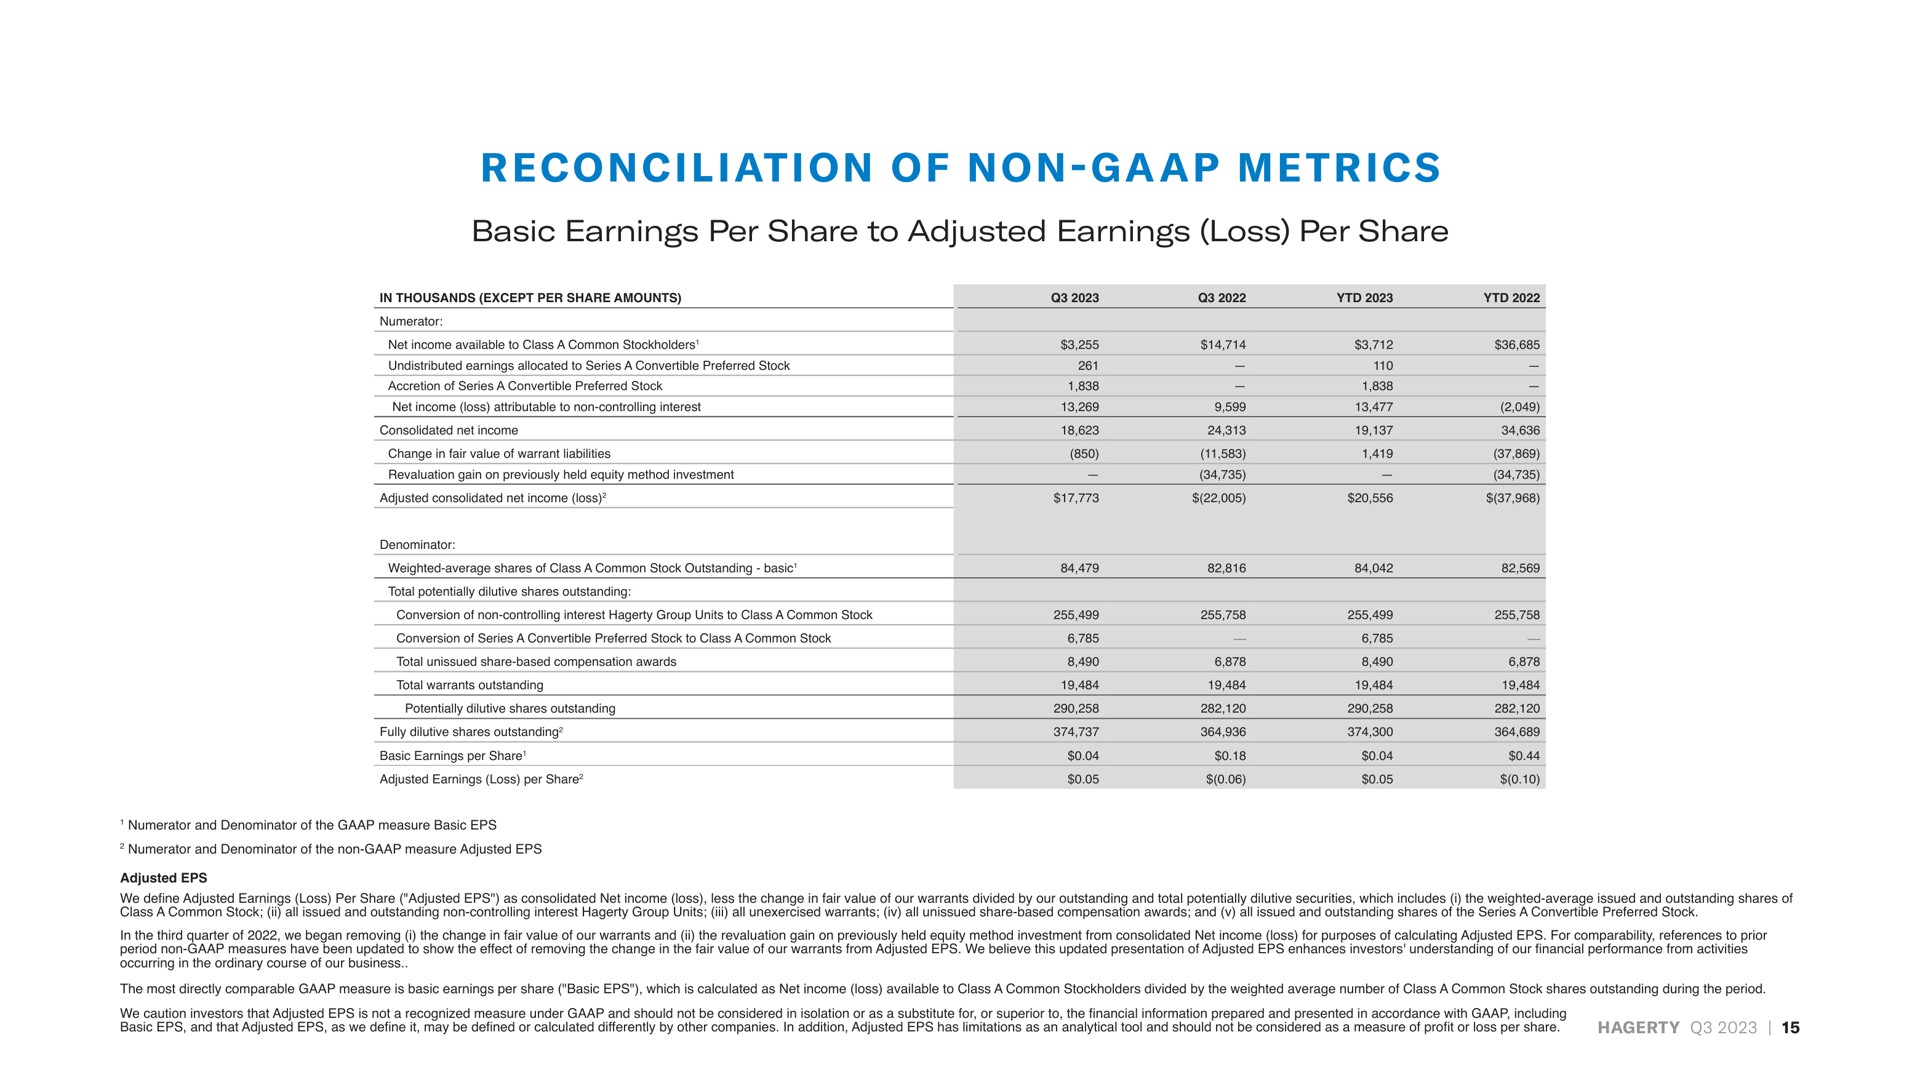 on ion of non a i basic earnings per share to adjusted earnings loss per share reconciliation non metrics | Hagerty